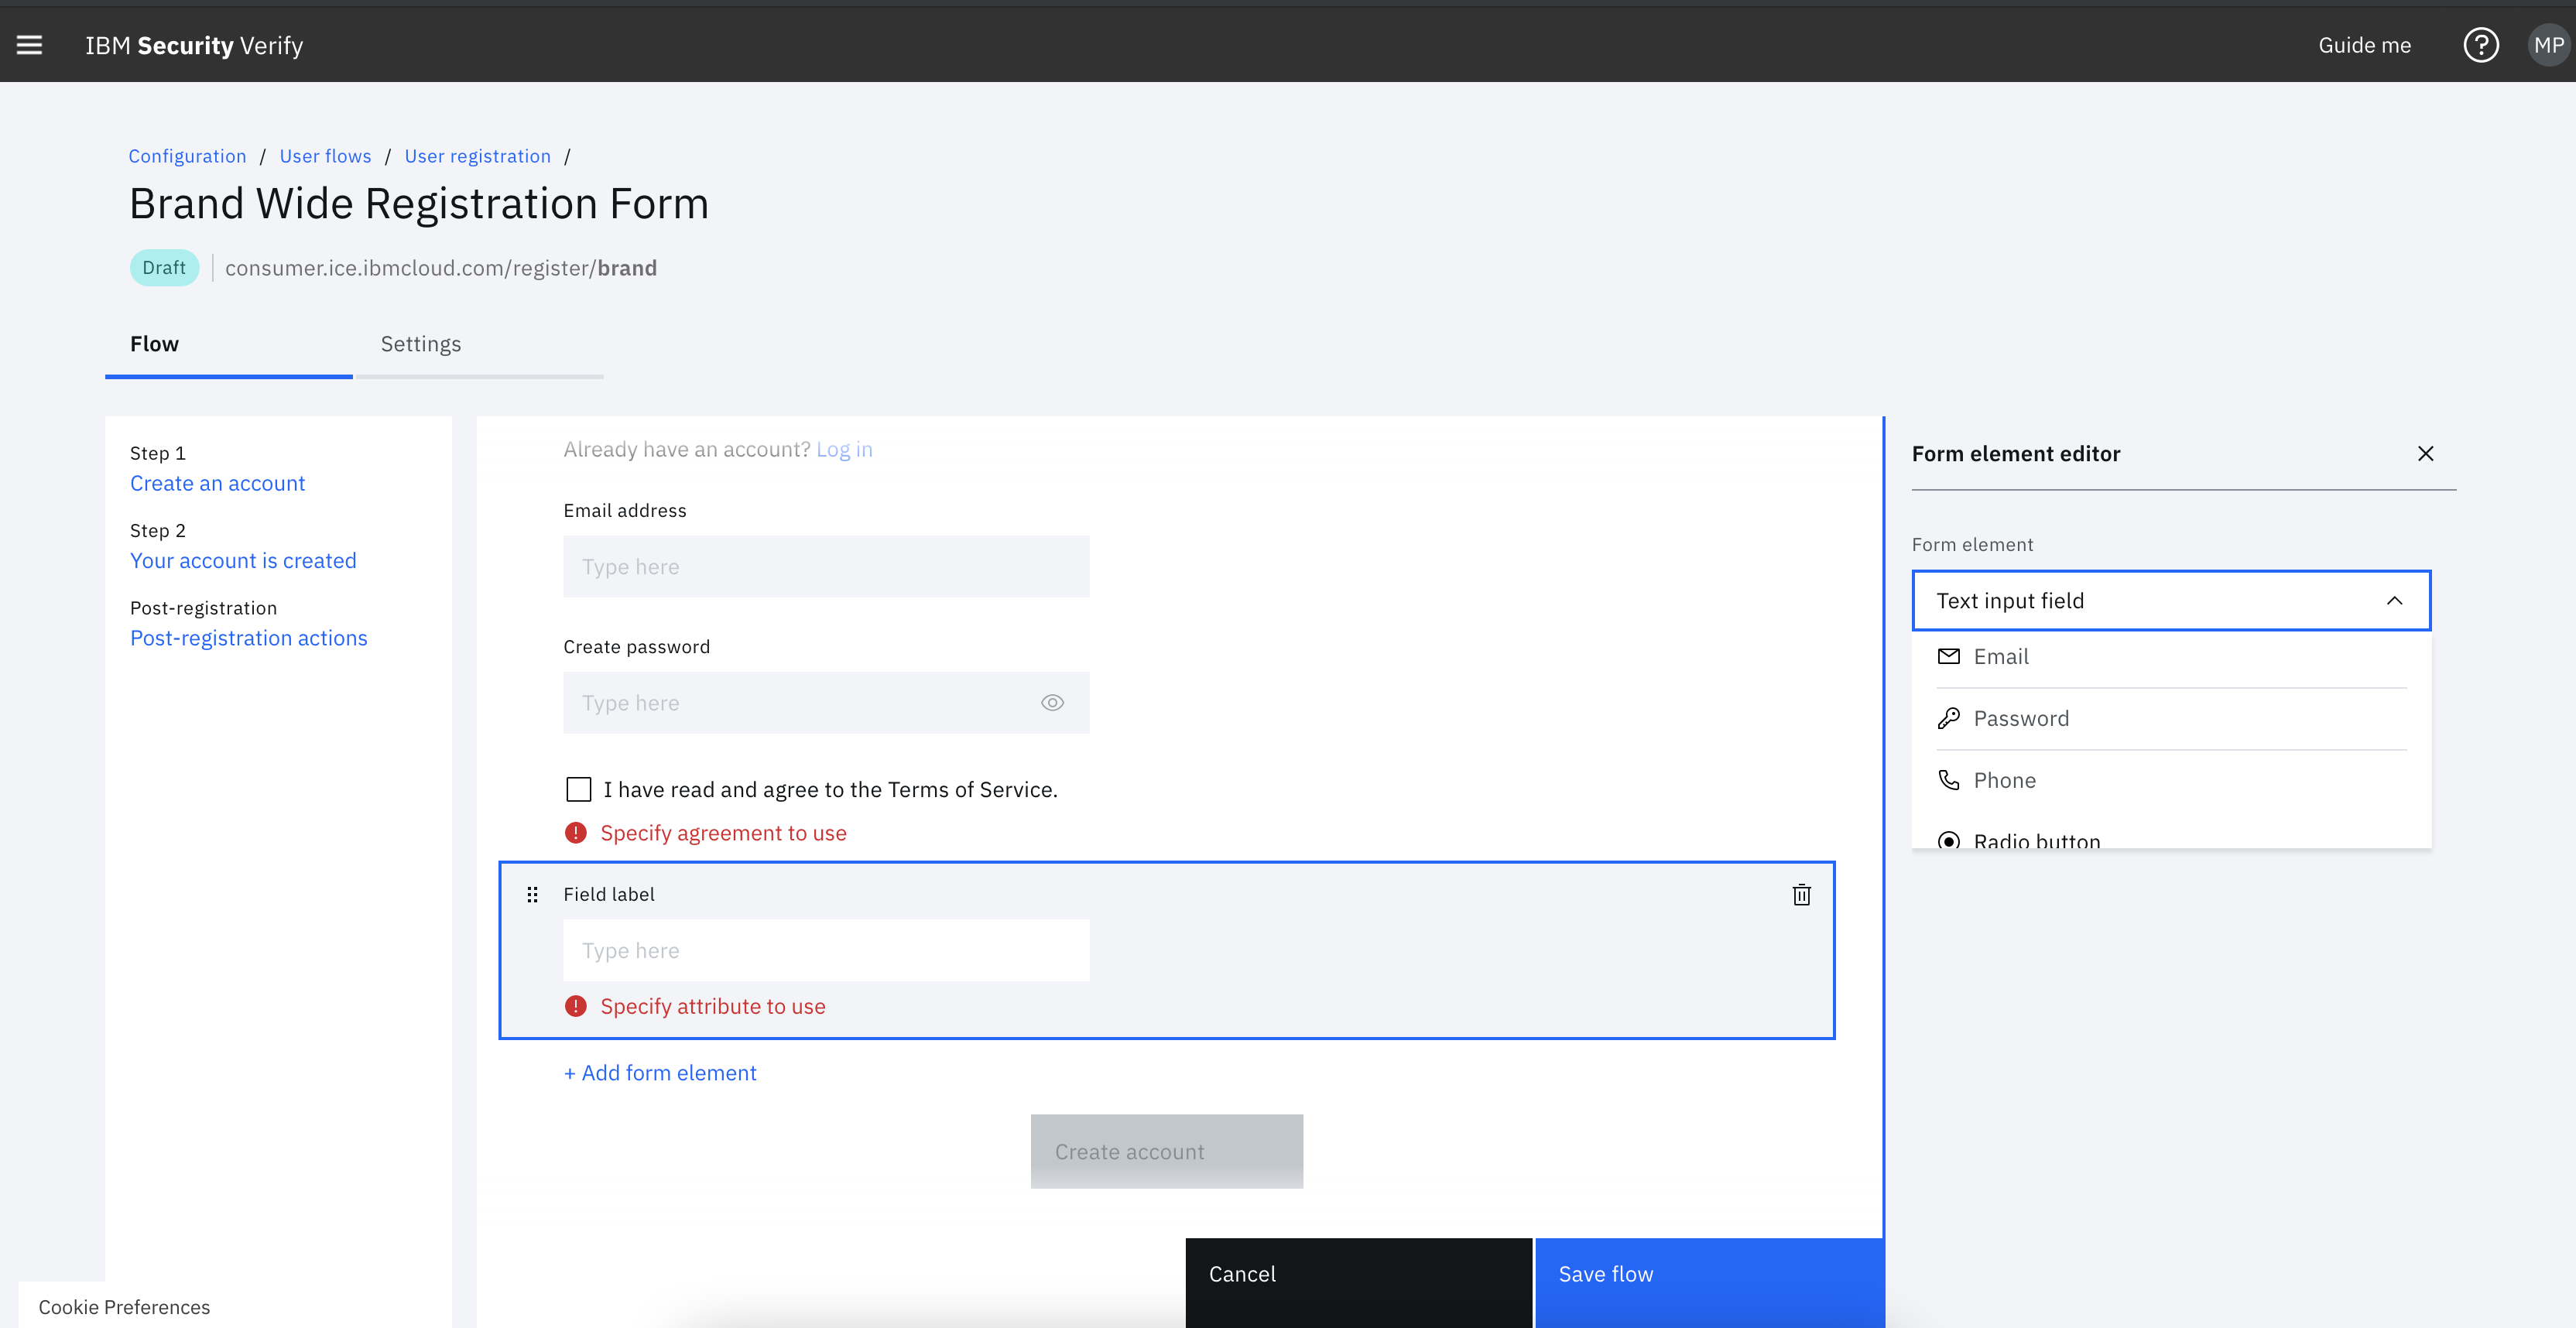 No-code, drag and drop registration form builder to define the sequence, fields, and page navigation.